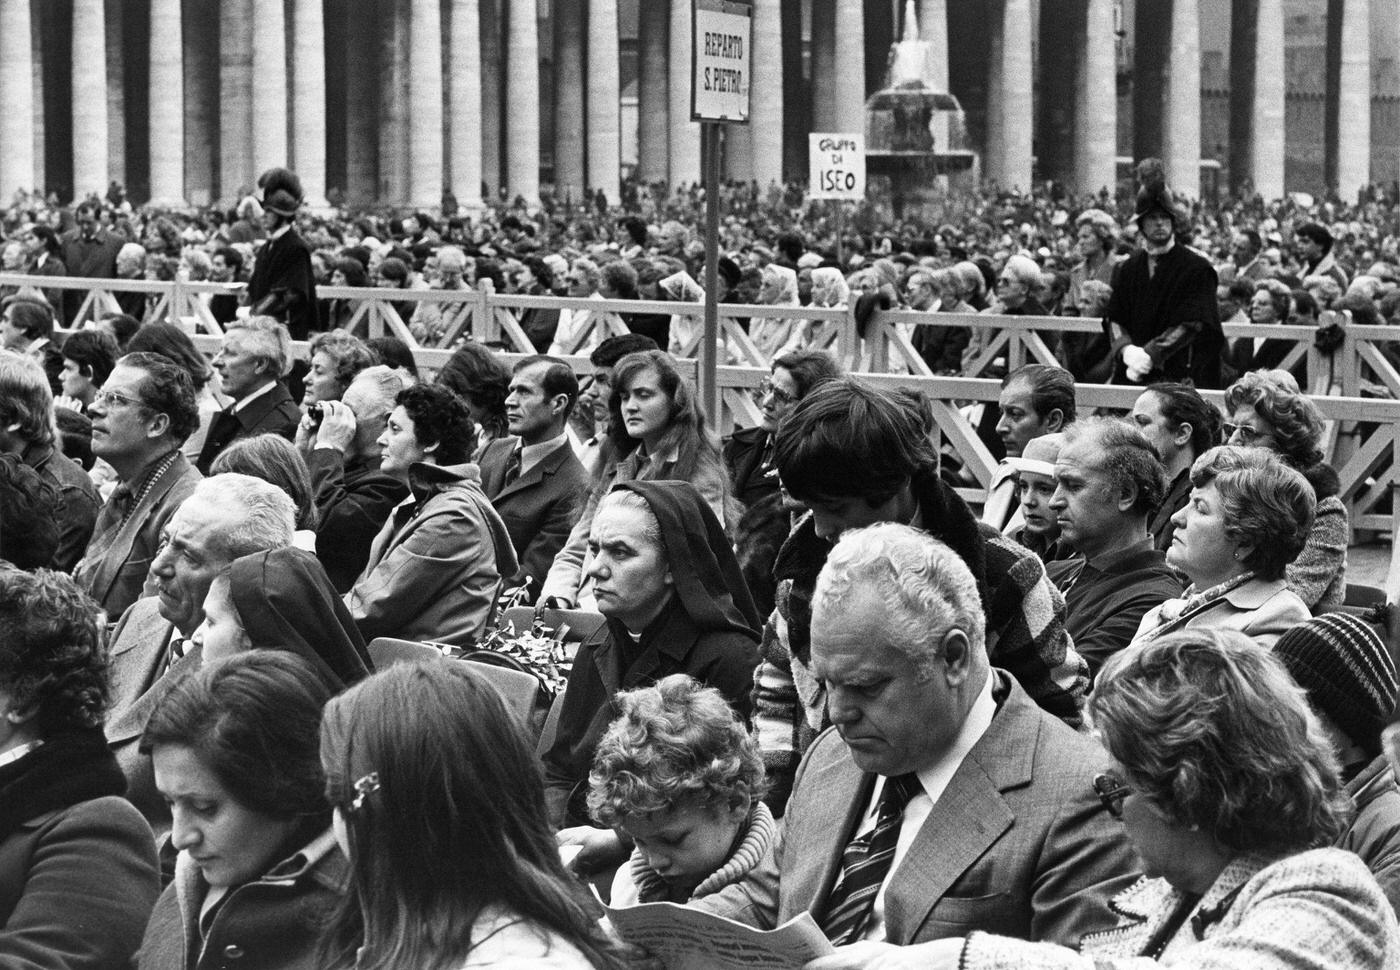 Believers Listening to Mass at St. Peter's Square, Rome, 1980